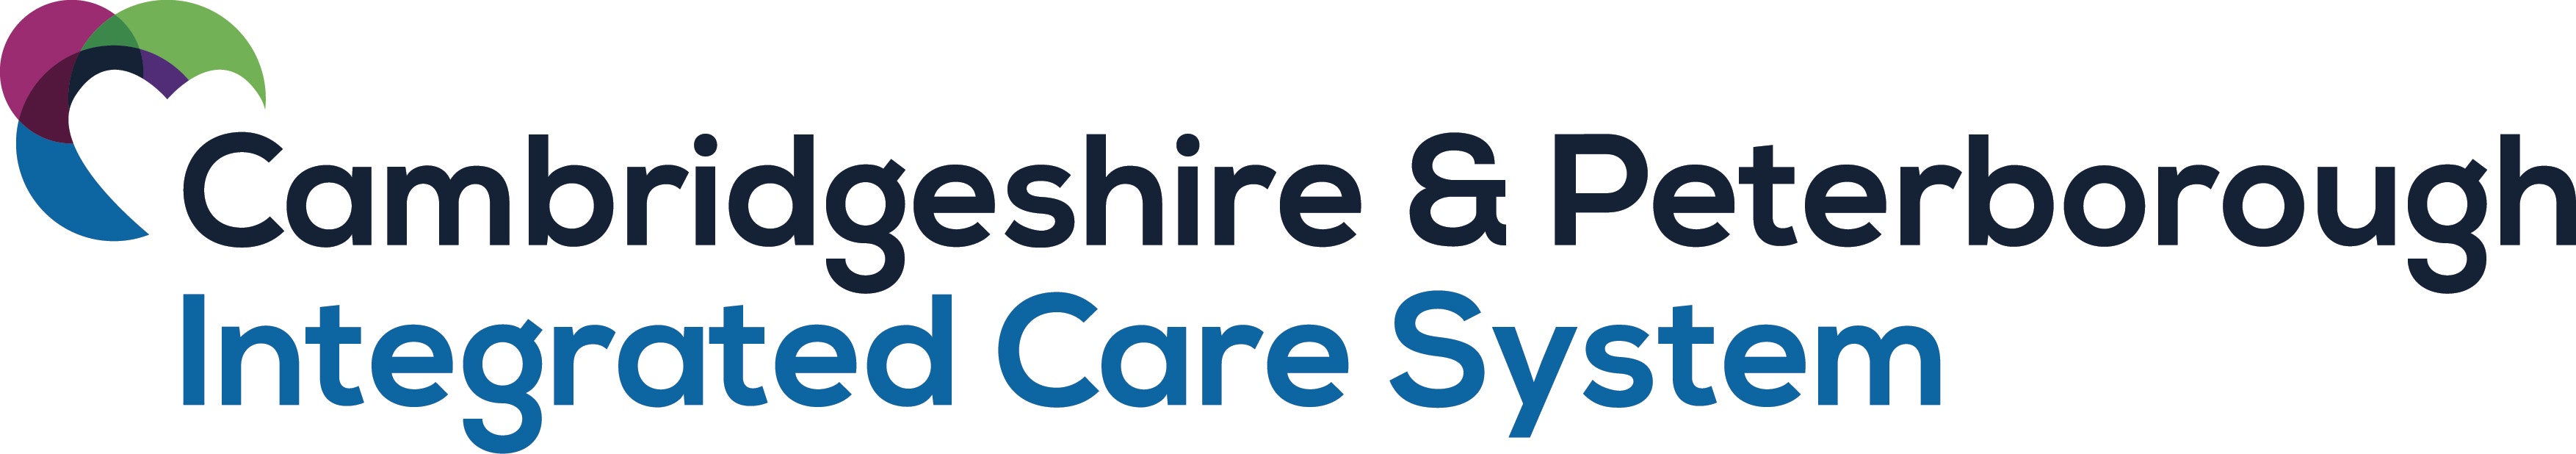 Cambridgeshire and Peterborough Integrated Care System